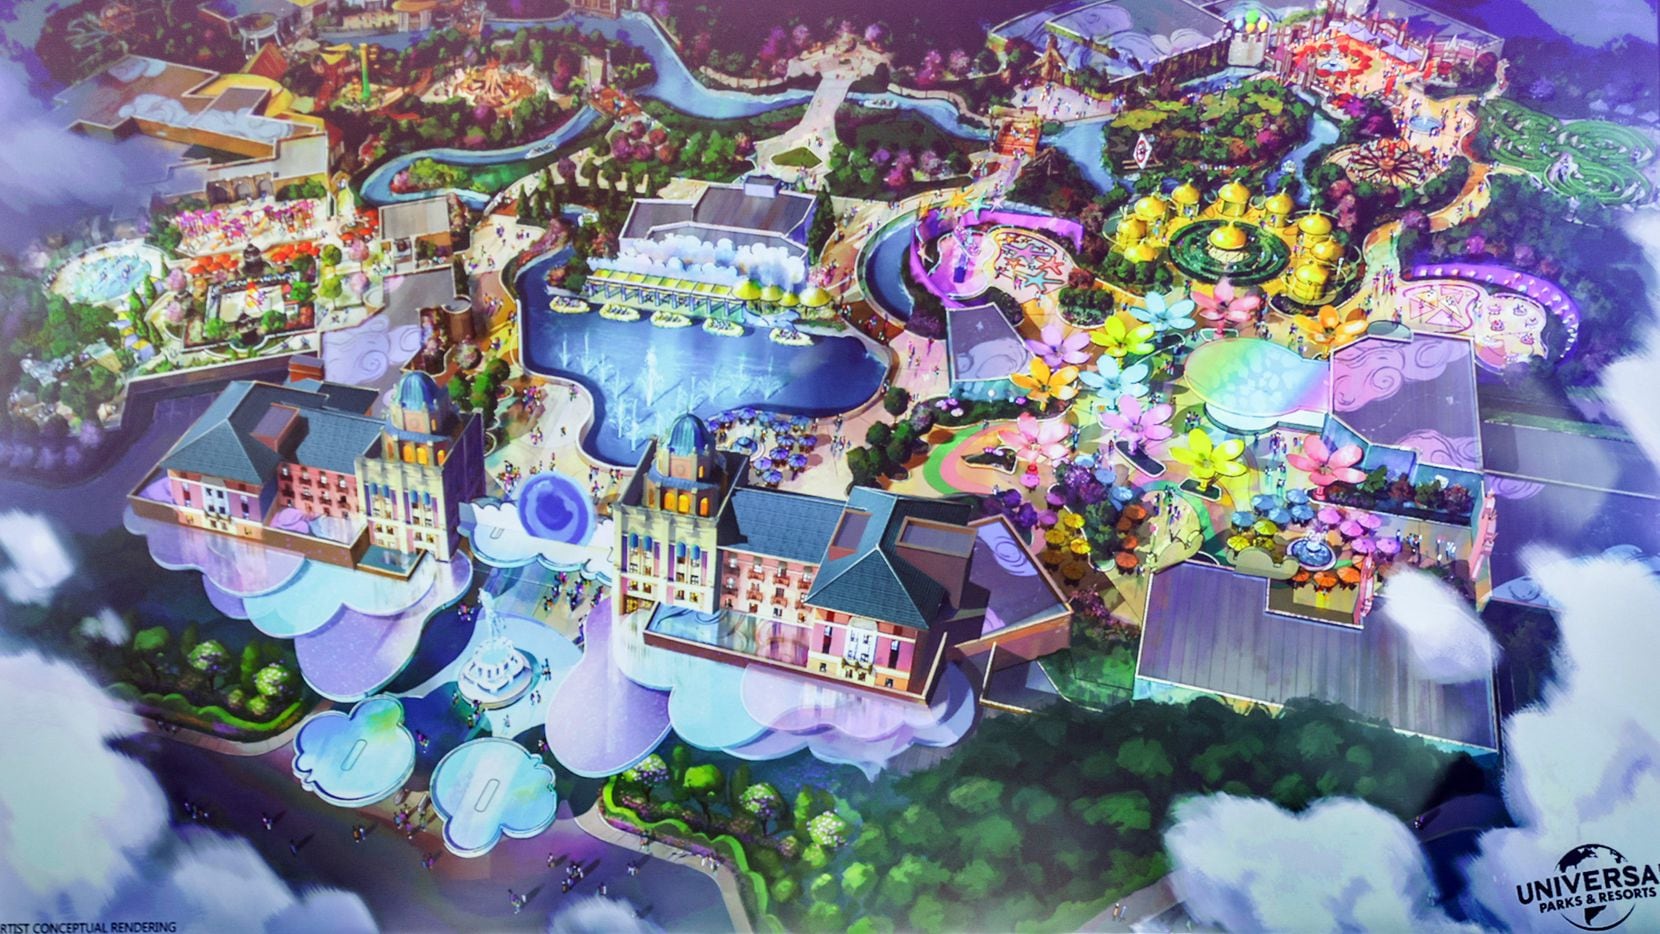 A rendering of what will be a Universal Studios theme park in Frisco.